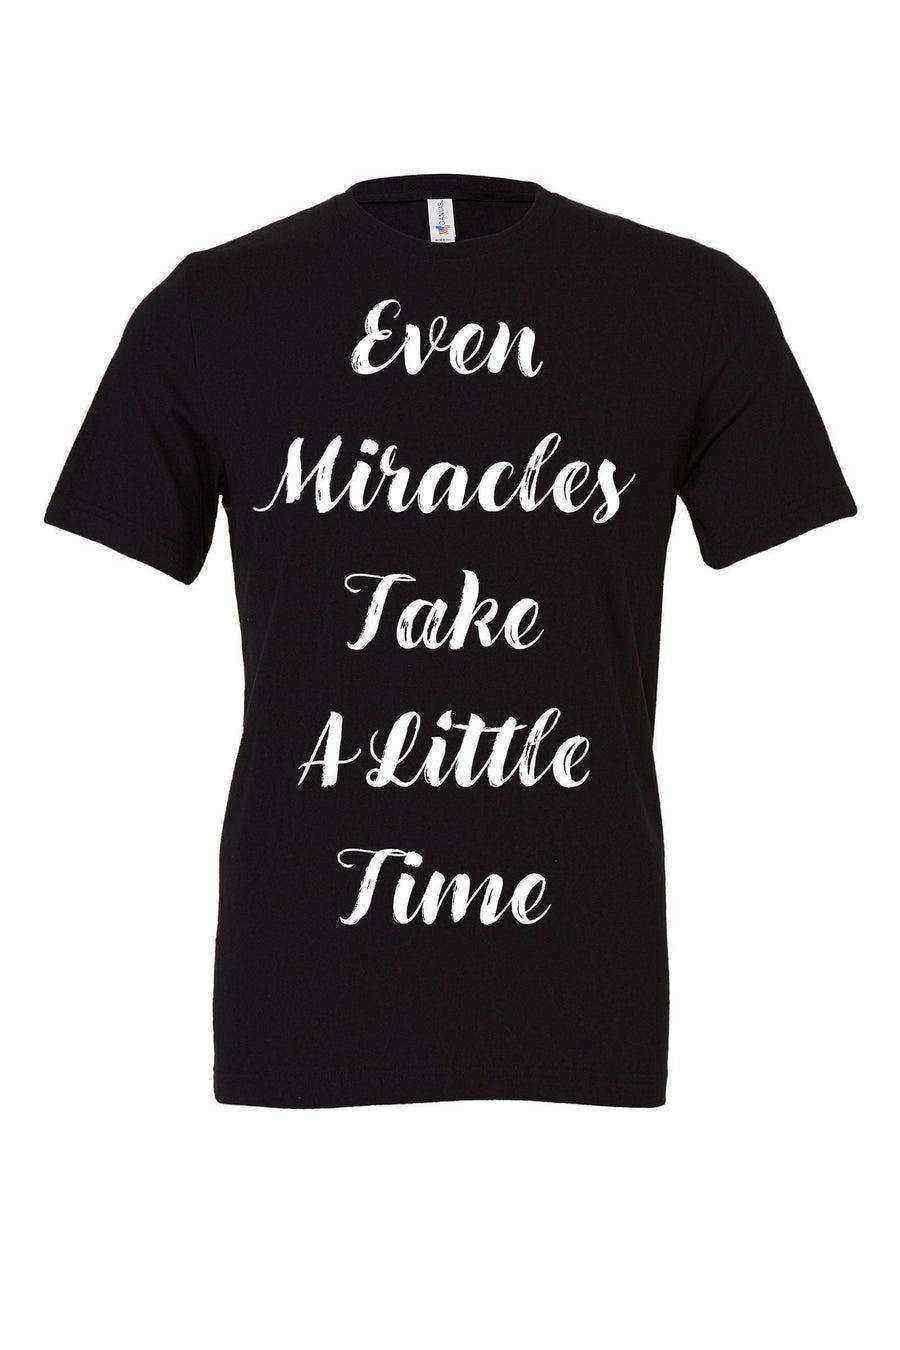 Cinderella Tee | Even Miracles Take A Little Time - Dylan's Tees